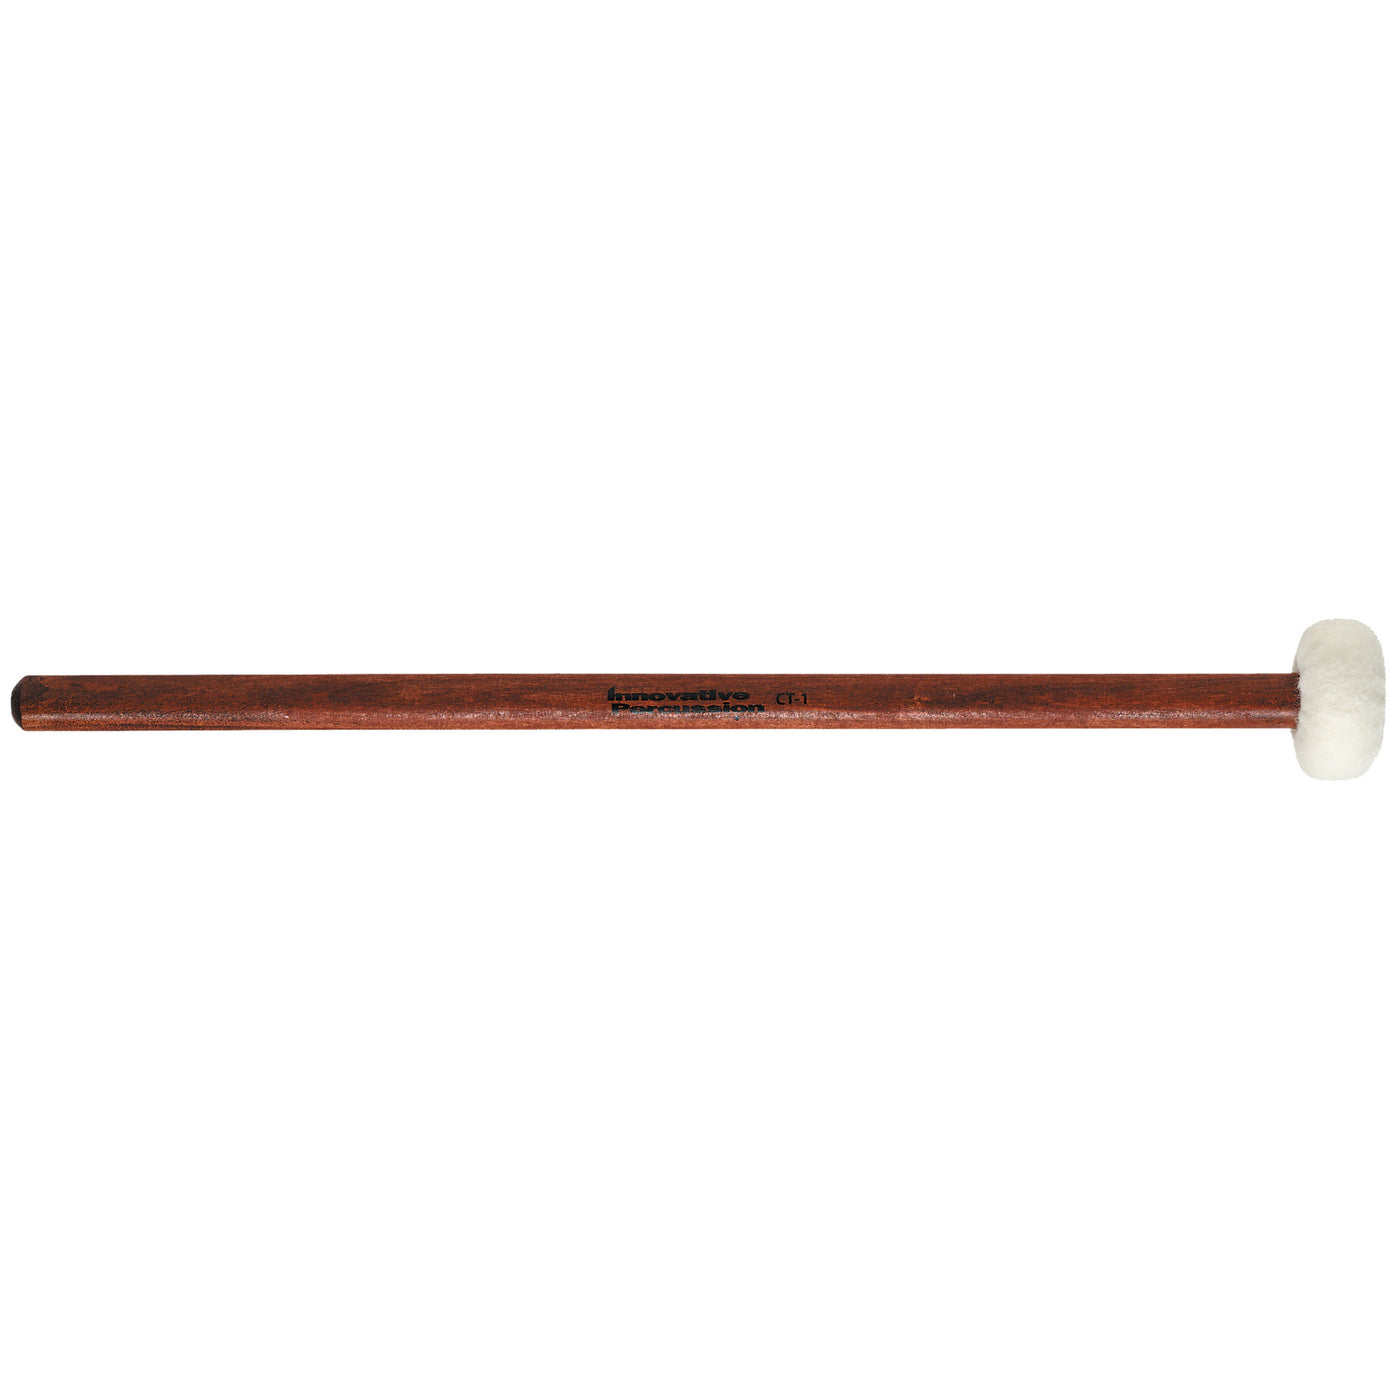 Innovative Percussion CT-1 Drum Mallet